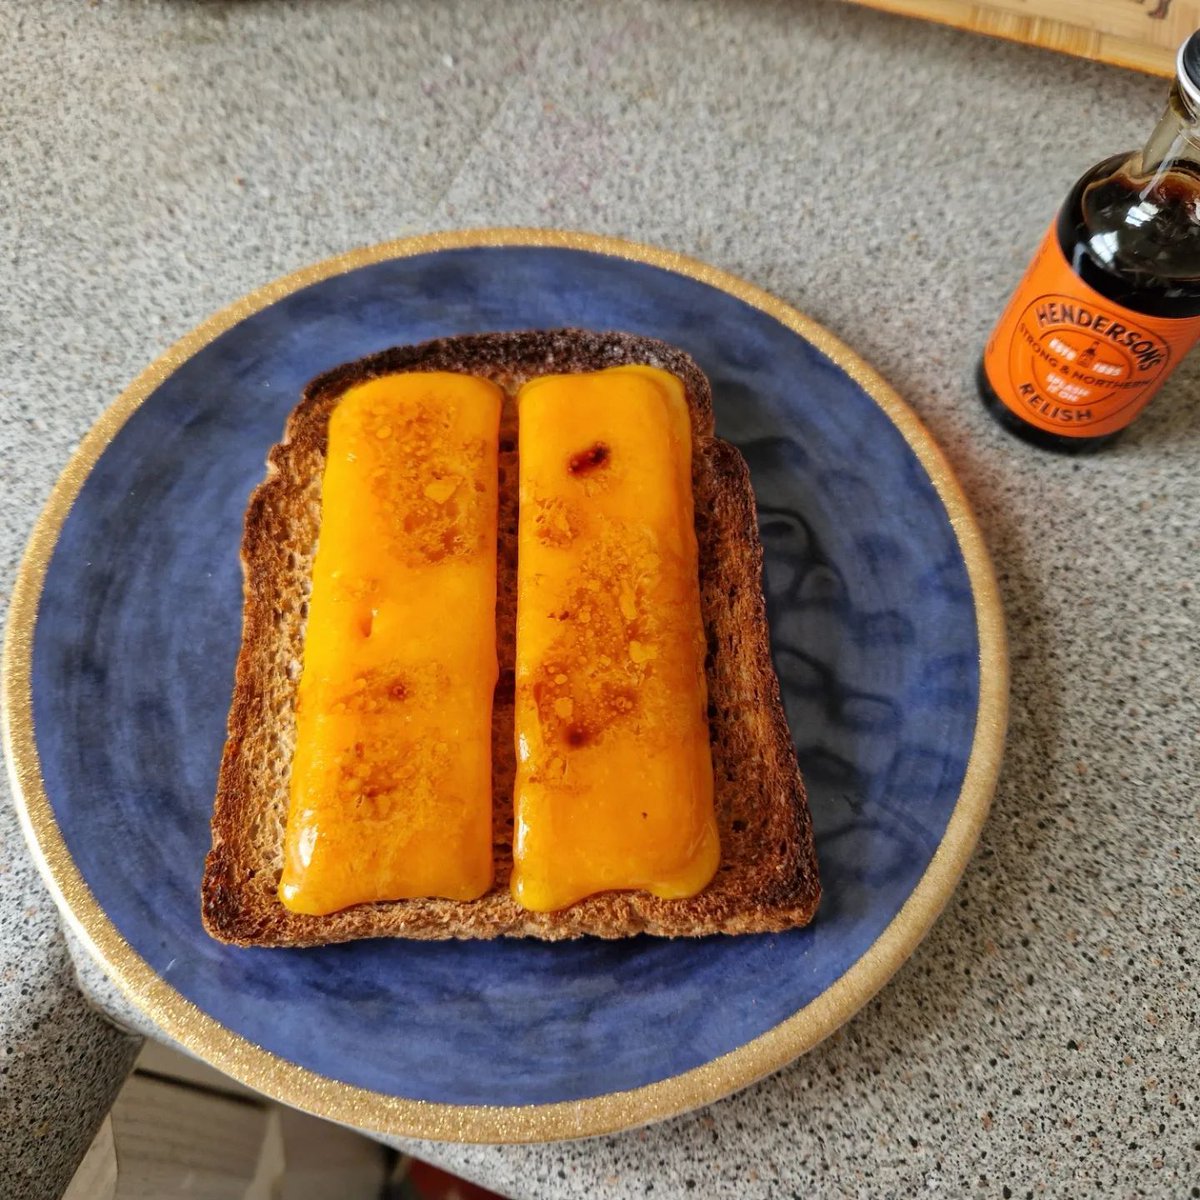 The rare two-slice approach to cheese on toast. How do you feel about it? 📷 by instagram.com/yuko.u.uk